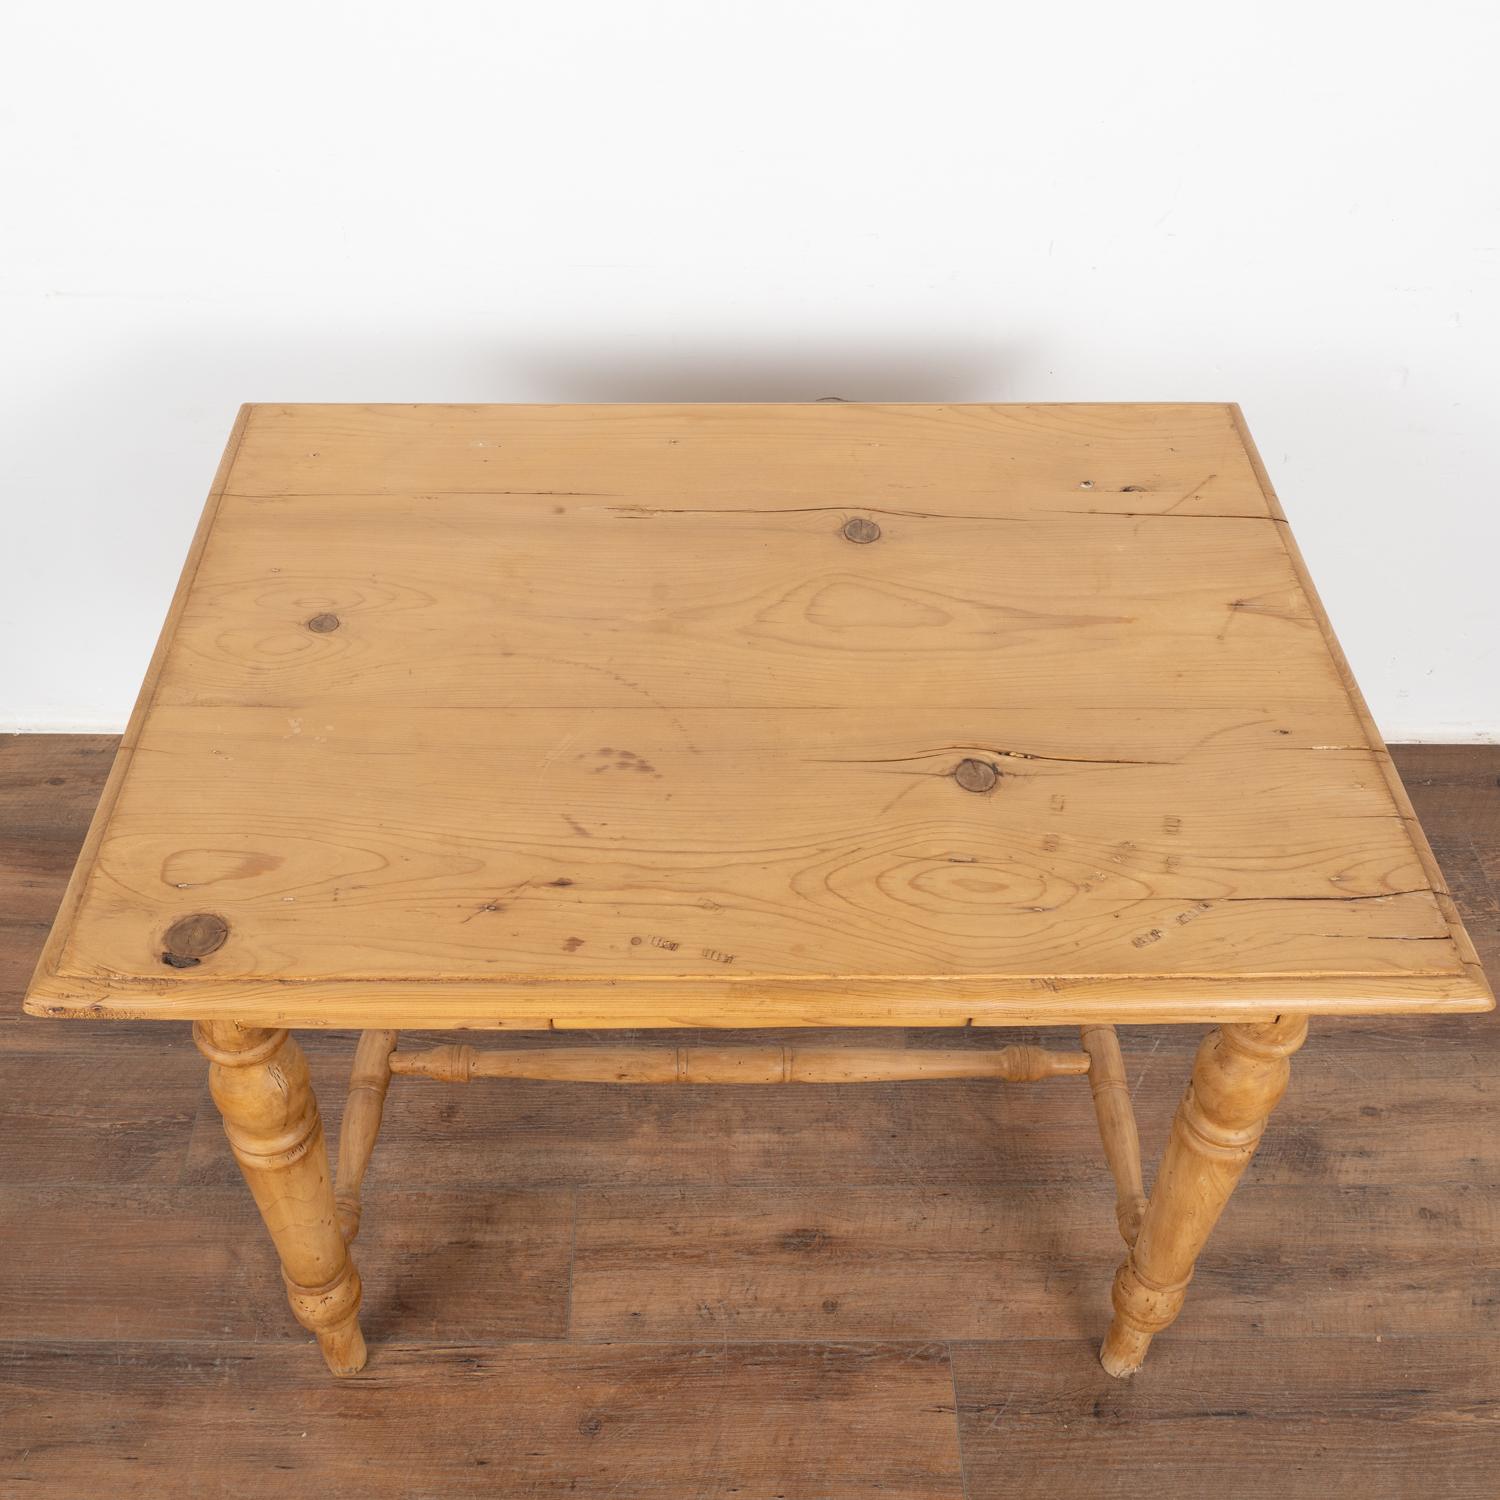 Pine Side Table With Turned Legs and Drawer, Denmark circa 1880-1900 In Good Condition For Sale In Round Top, TX